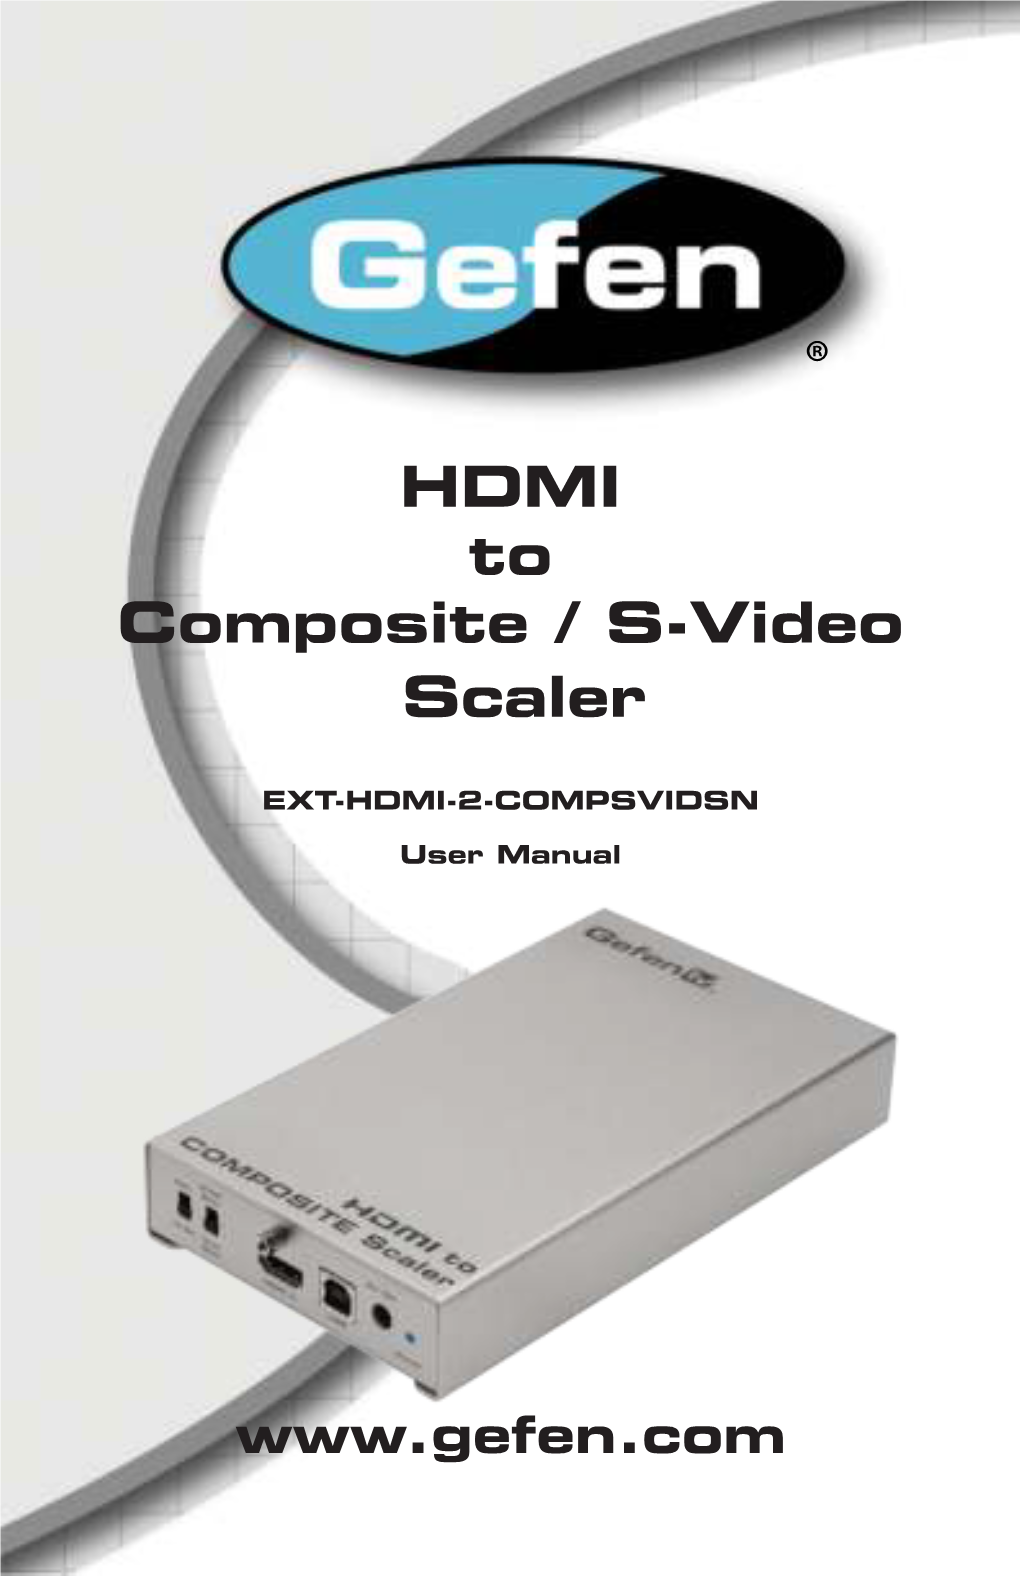 HDMI to Composite / S-Video Scaler